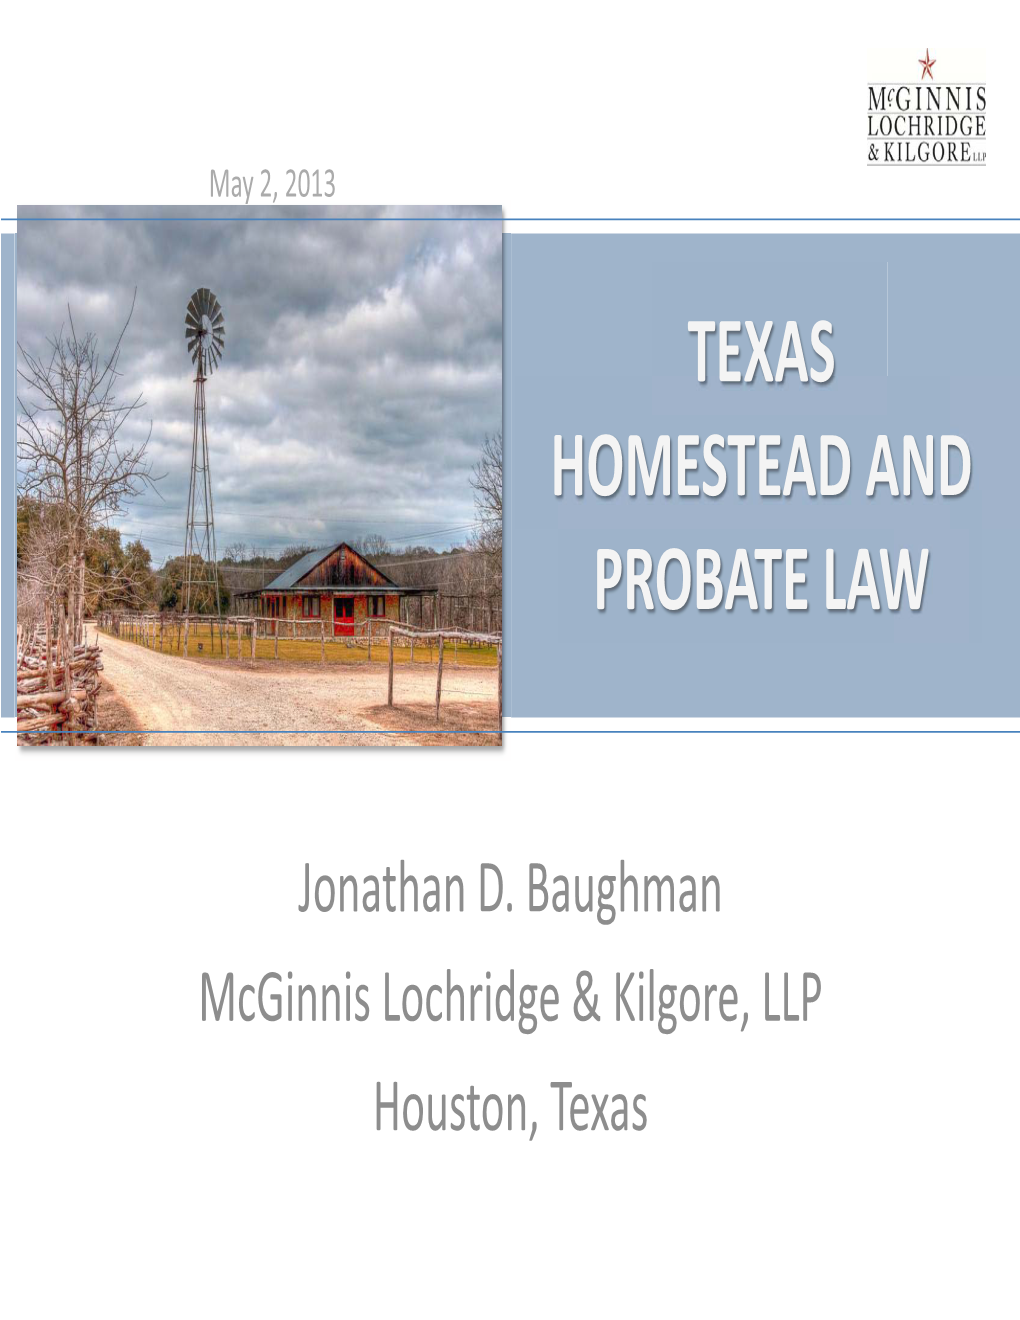 Texas Homestead and Probate Law